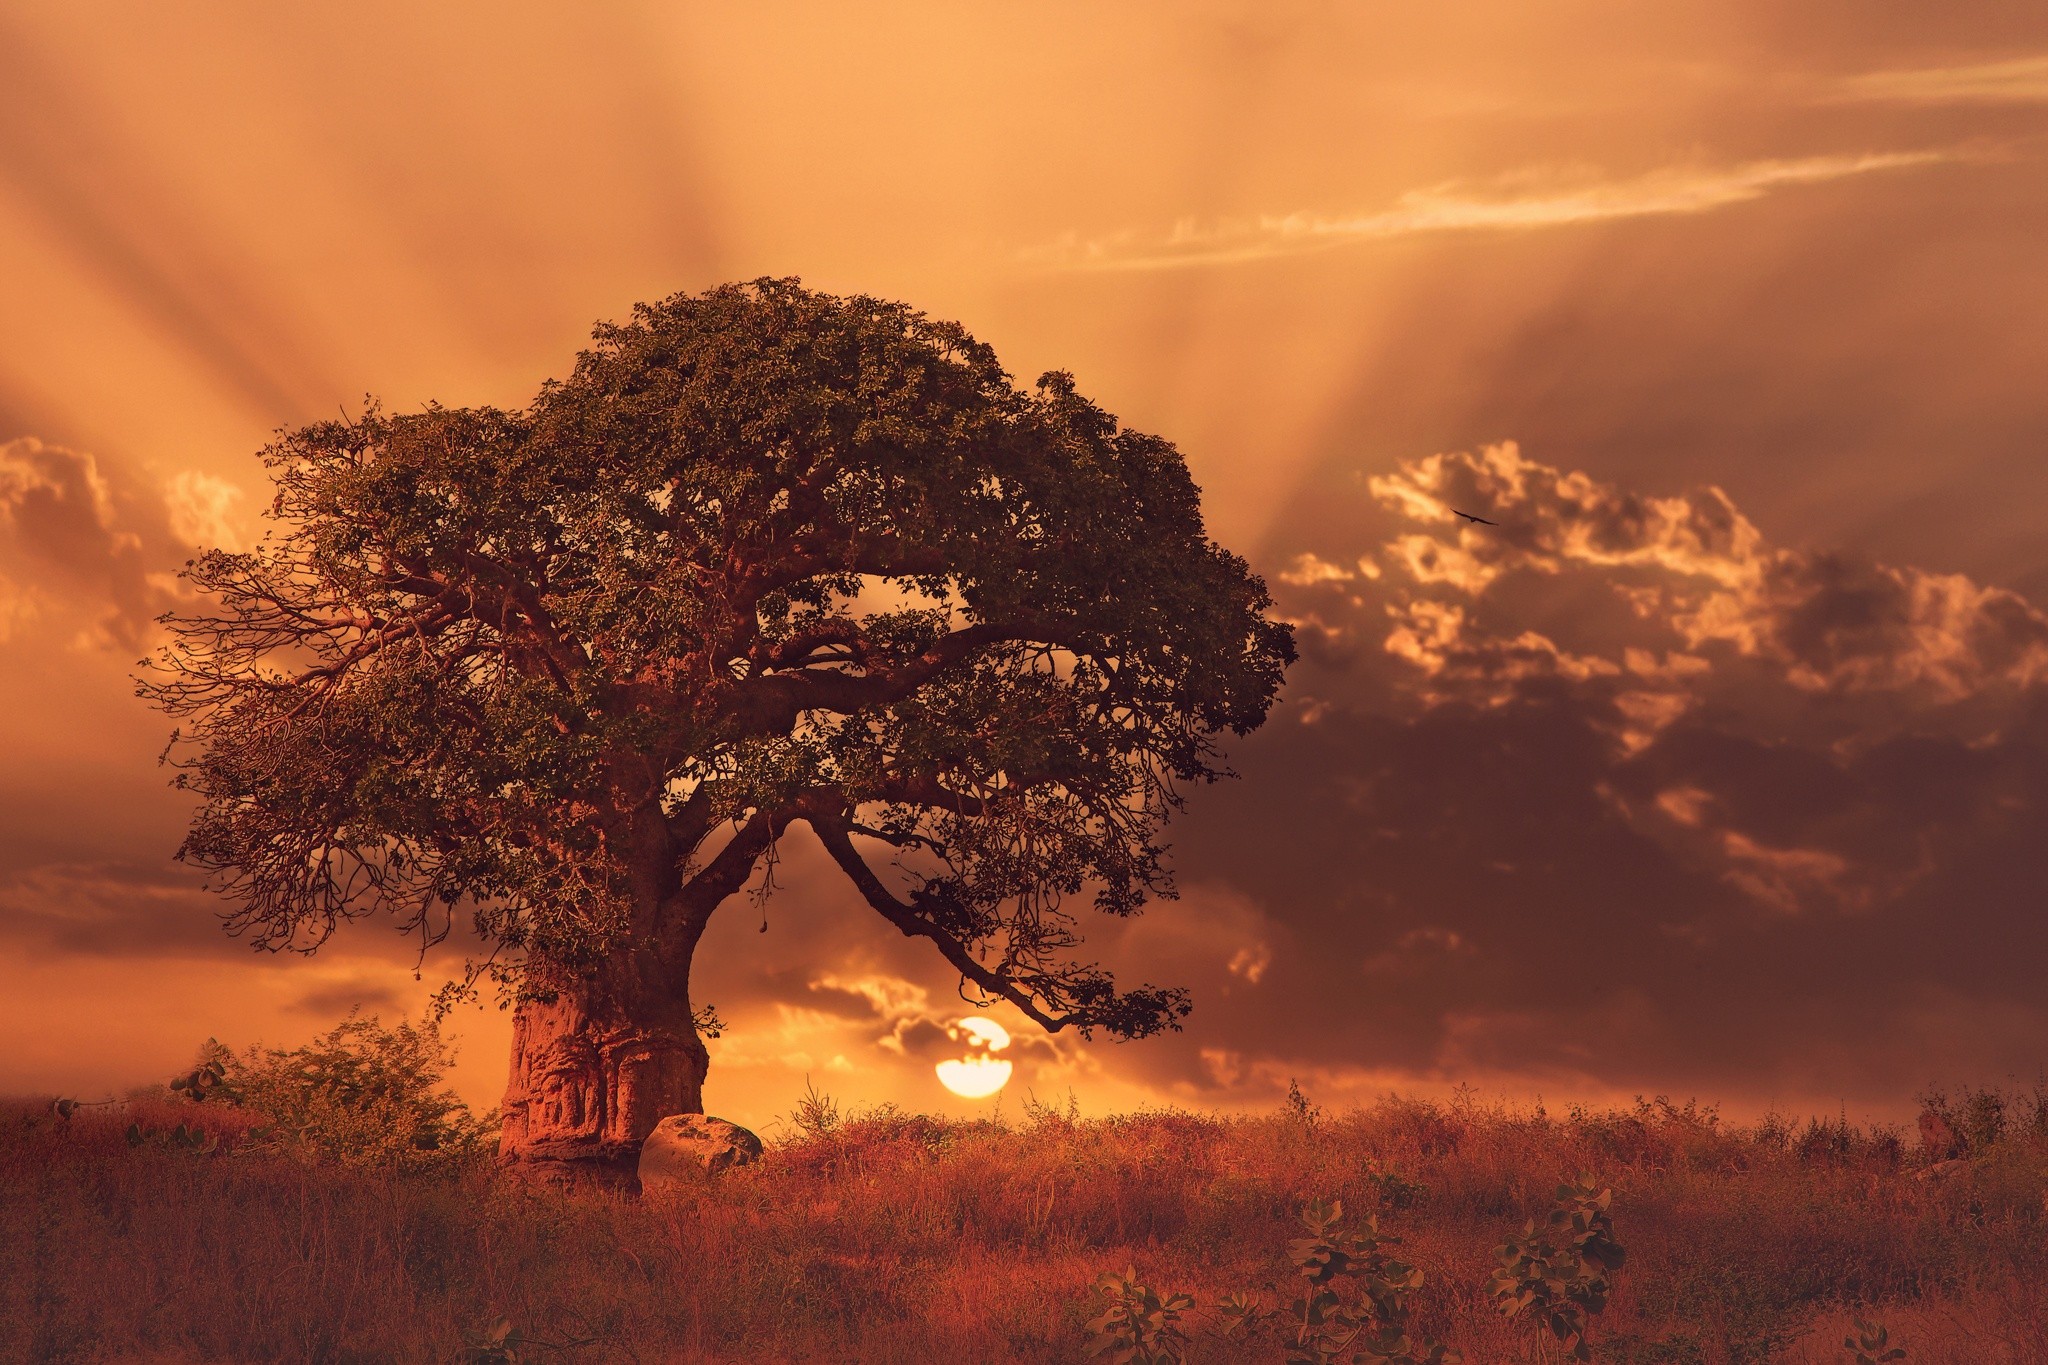 Wallpapers baobab trees nature old tree on the desktop